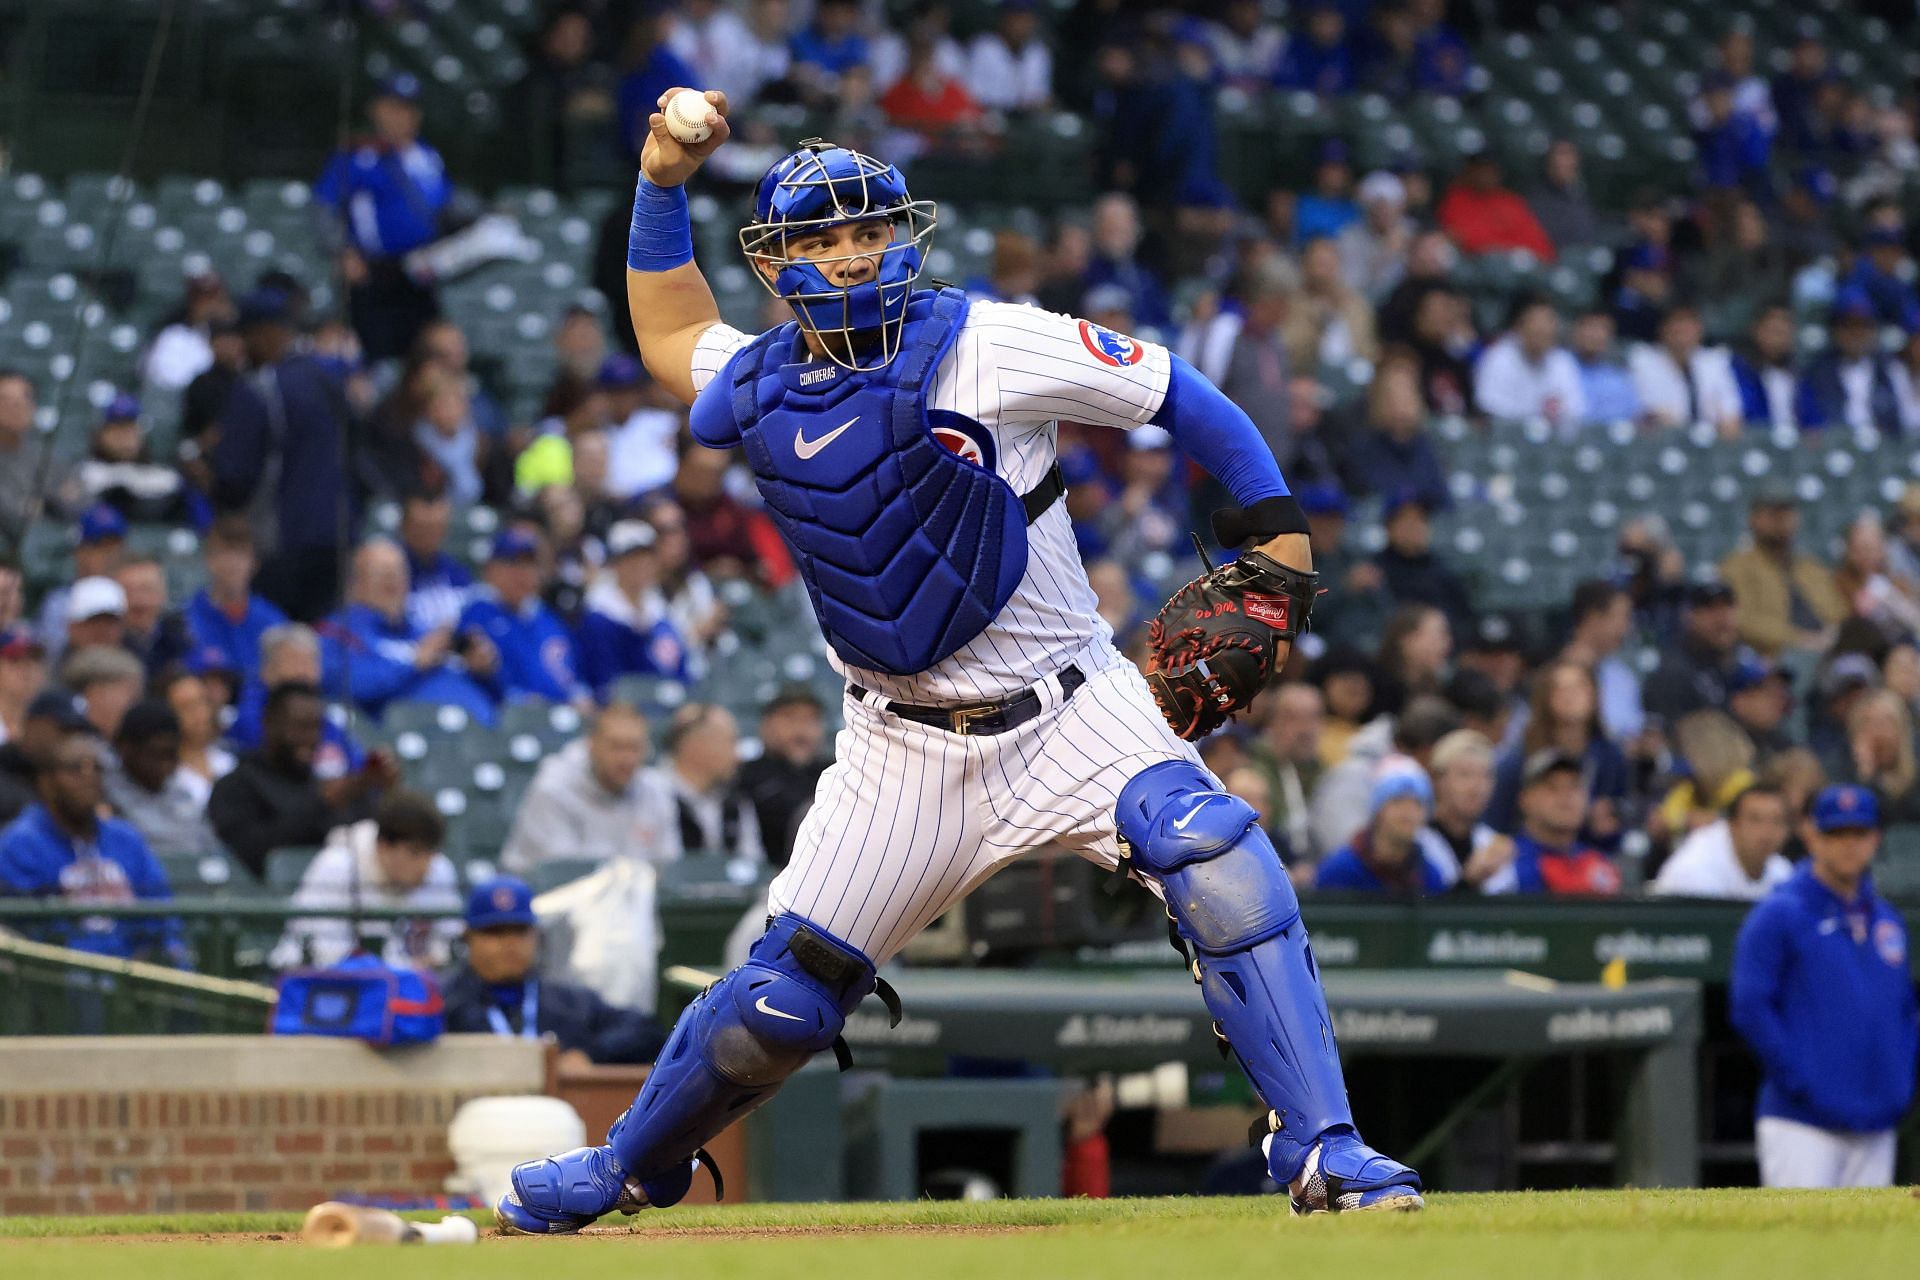 Willson Contreras throws the ball to first base in the game against the Pittsburgh Pirates at Wrigley Field